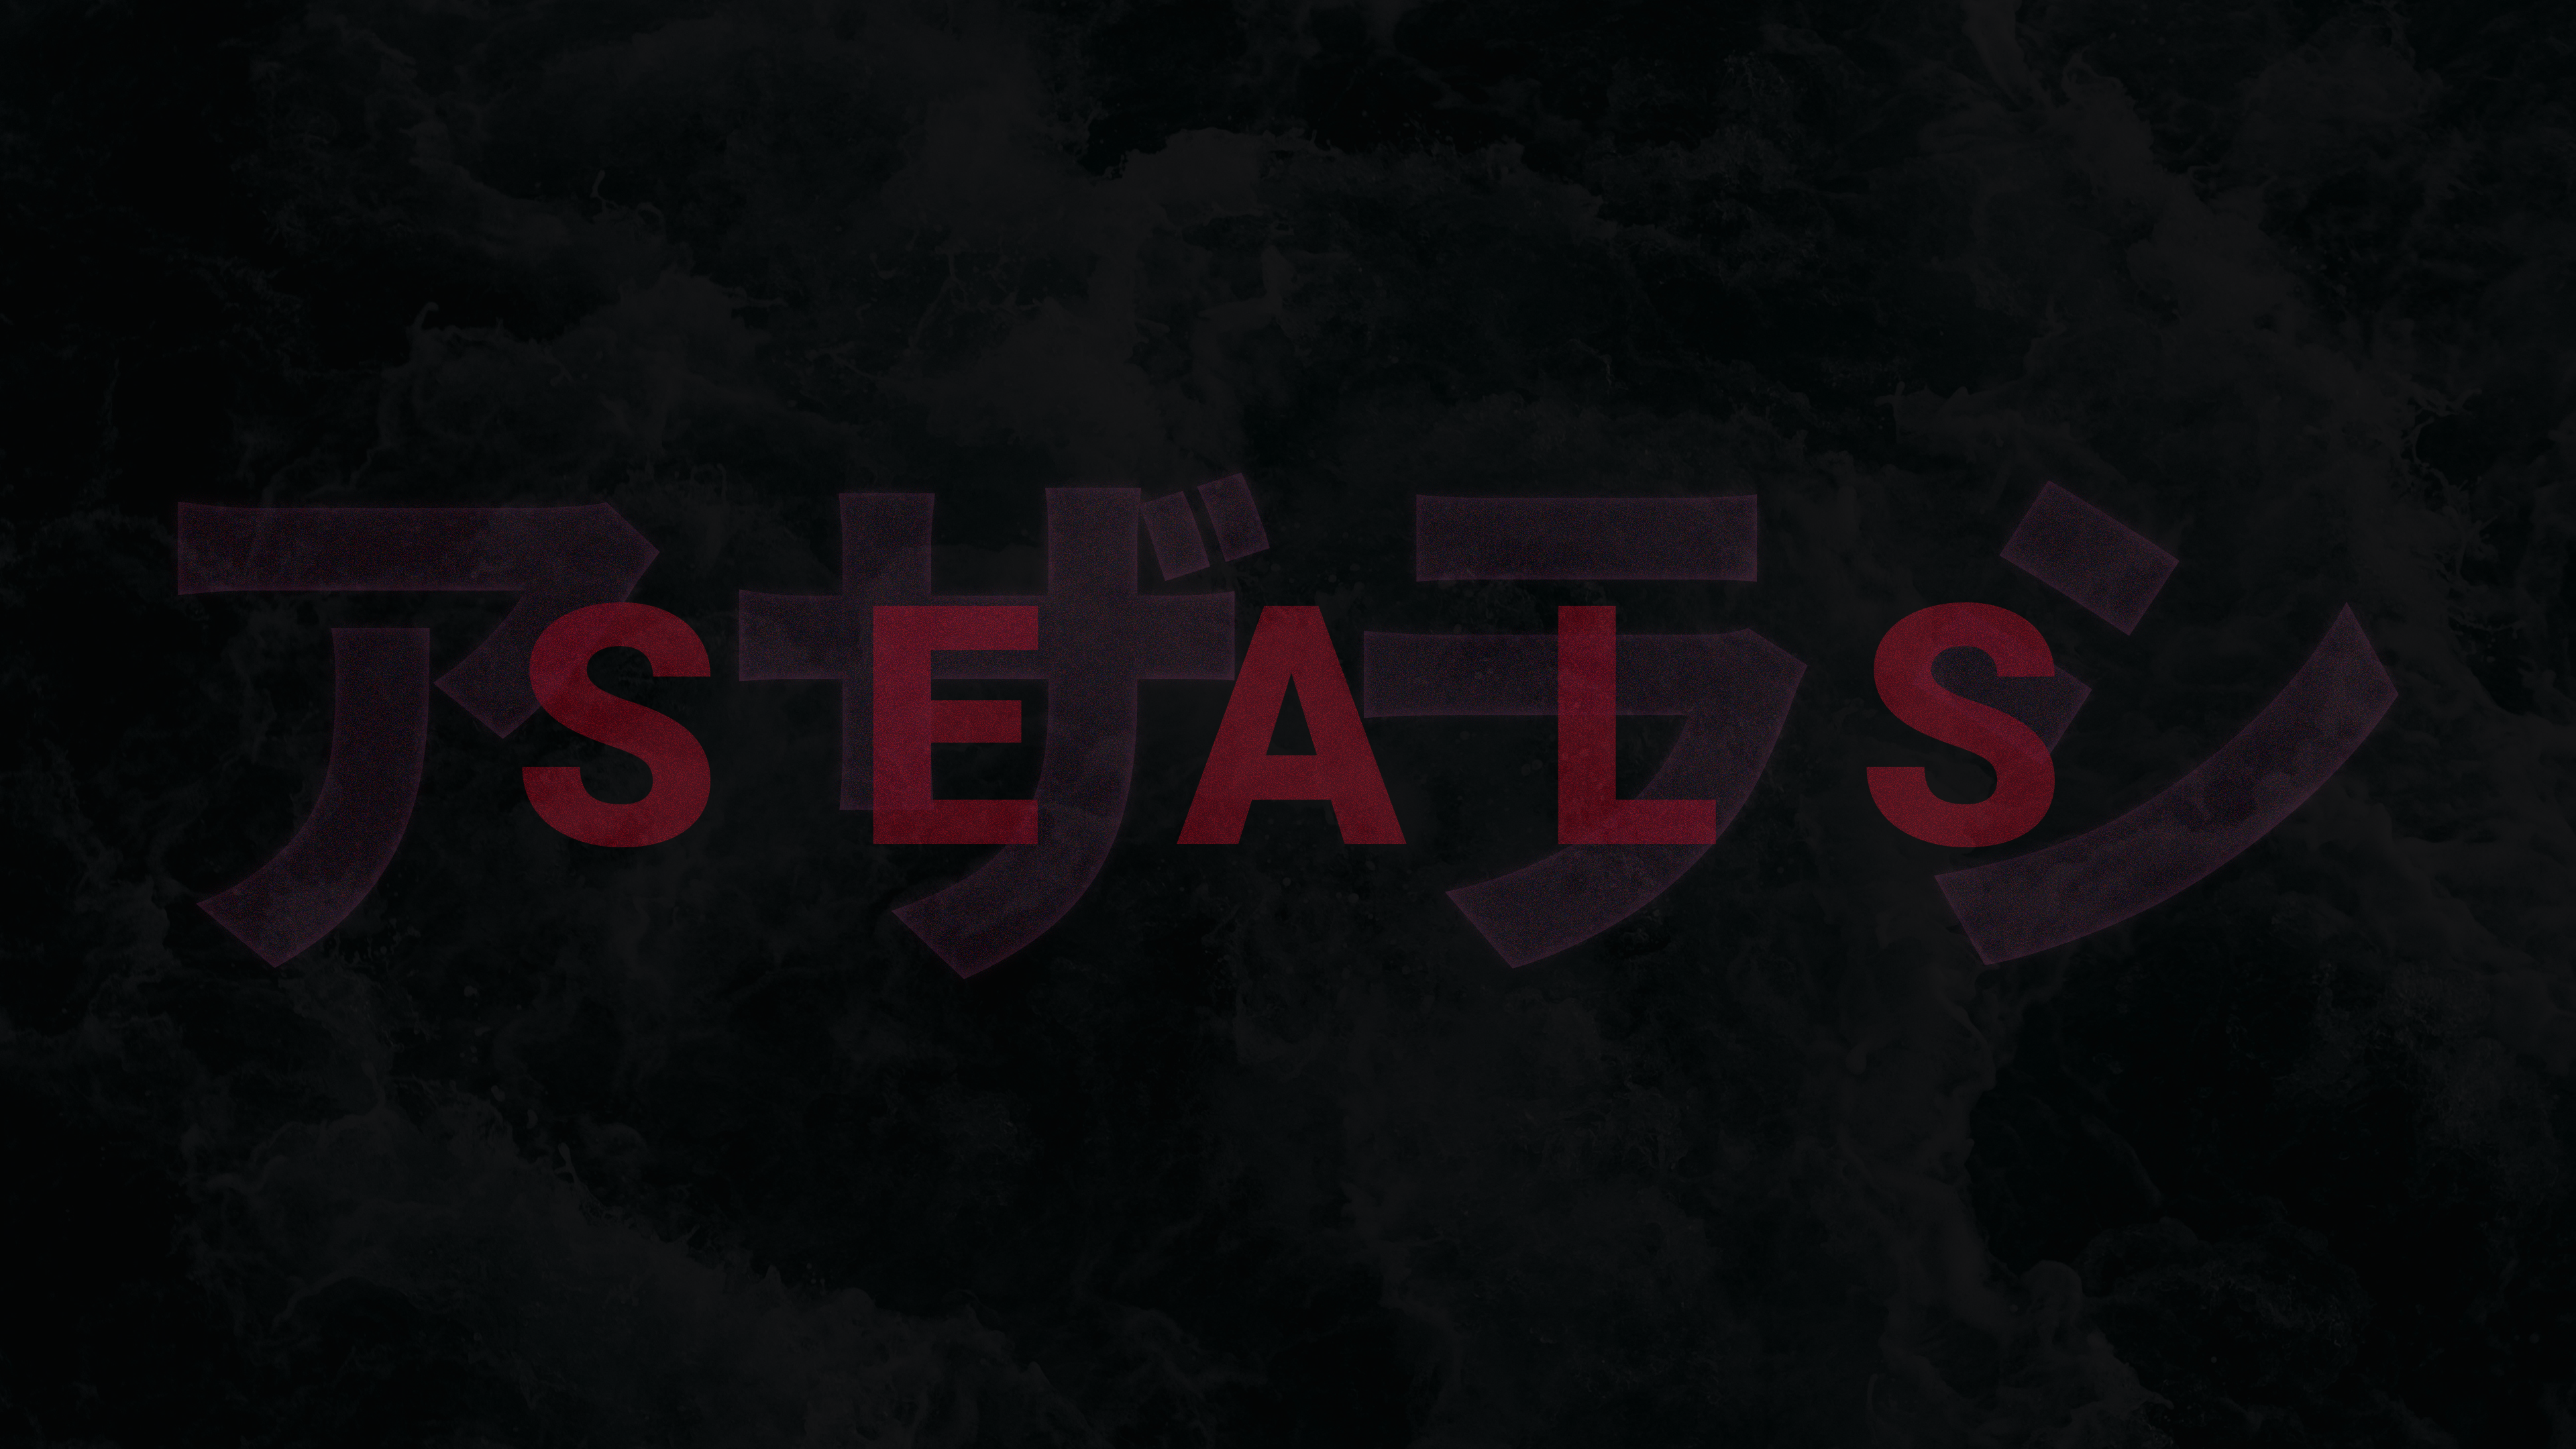 the word SEALS in English above the same word in Japanese